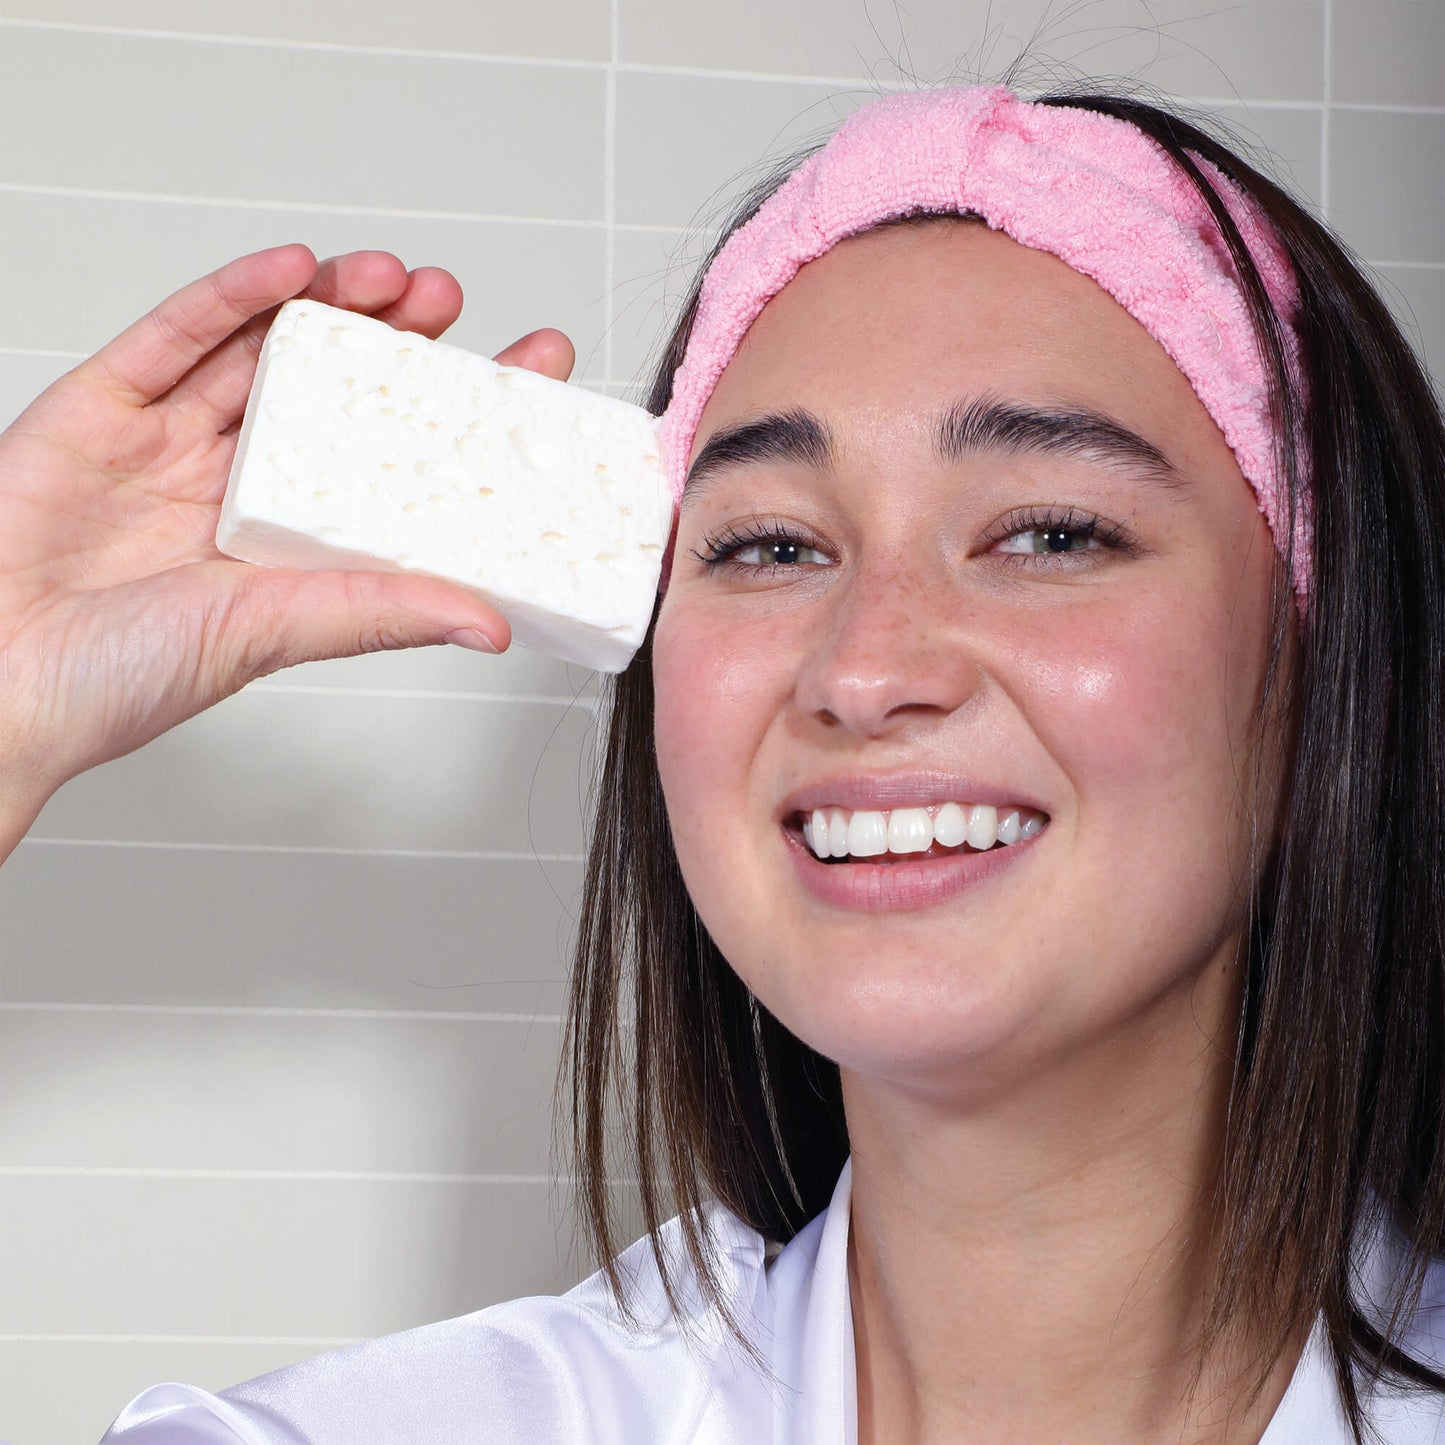 Mother of Pearl Soap Sponge - Afterspa -  Spa experience at home